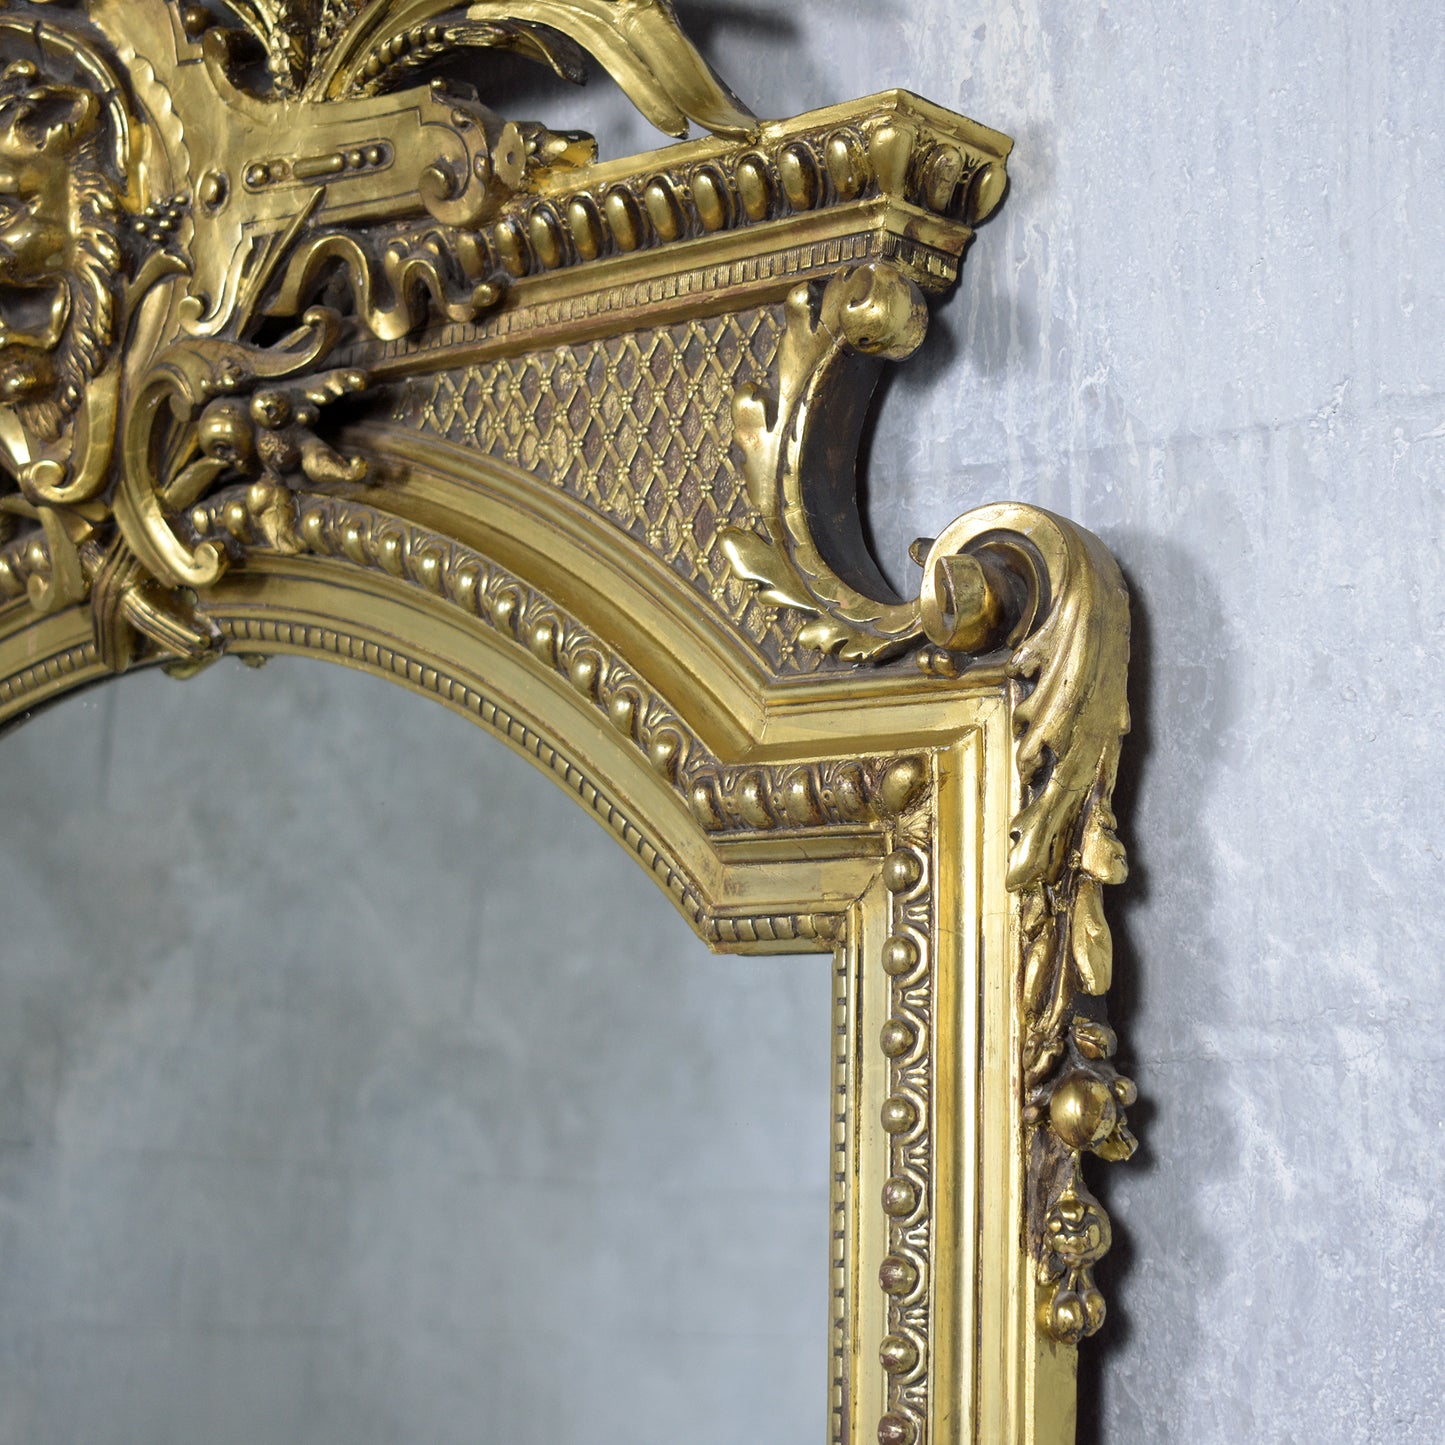 Late 19th-Century French Standing Mirror: A Masterpiece of Craftsmanship